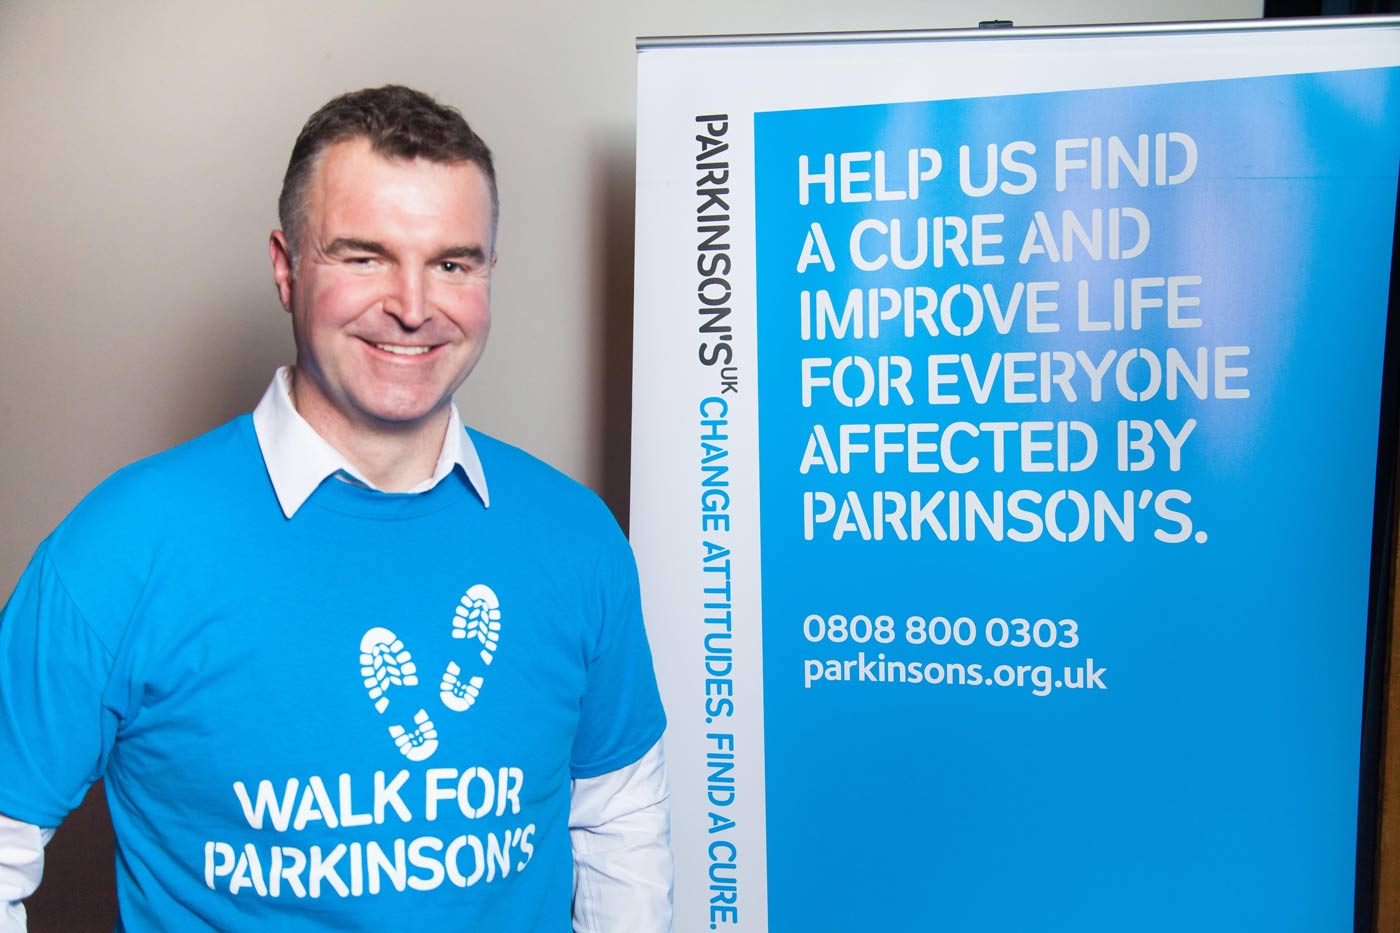 Sky Sports Presenter and Champion of Walking for Parkinson’s UK Dave Clark was diagnosed with Parkinson’s in 2011